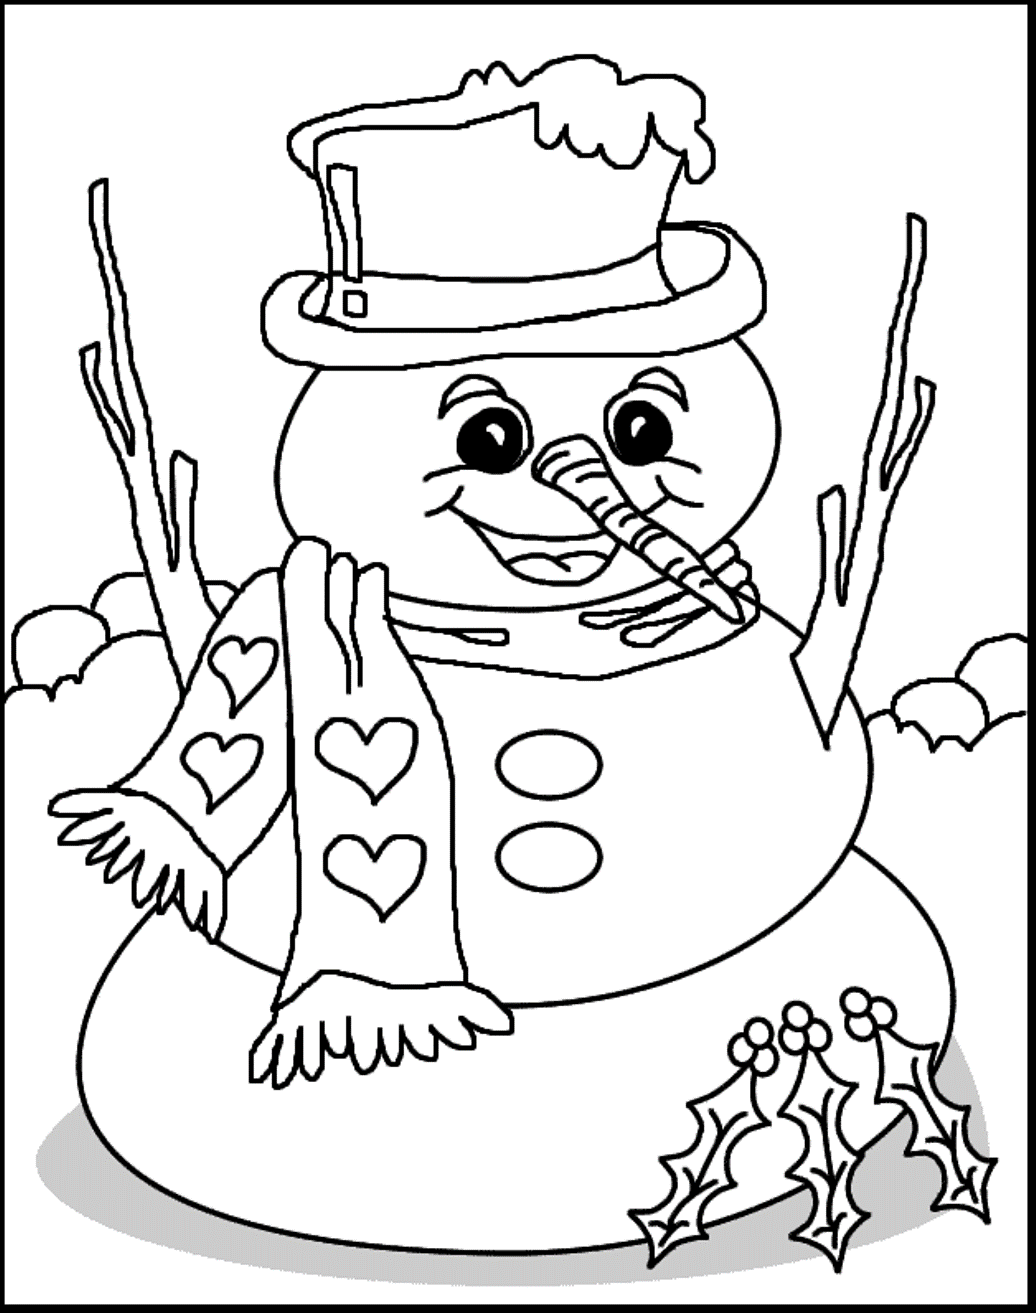 snow scene coloring pages for kids